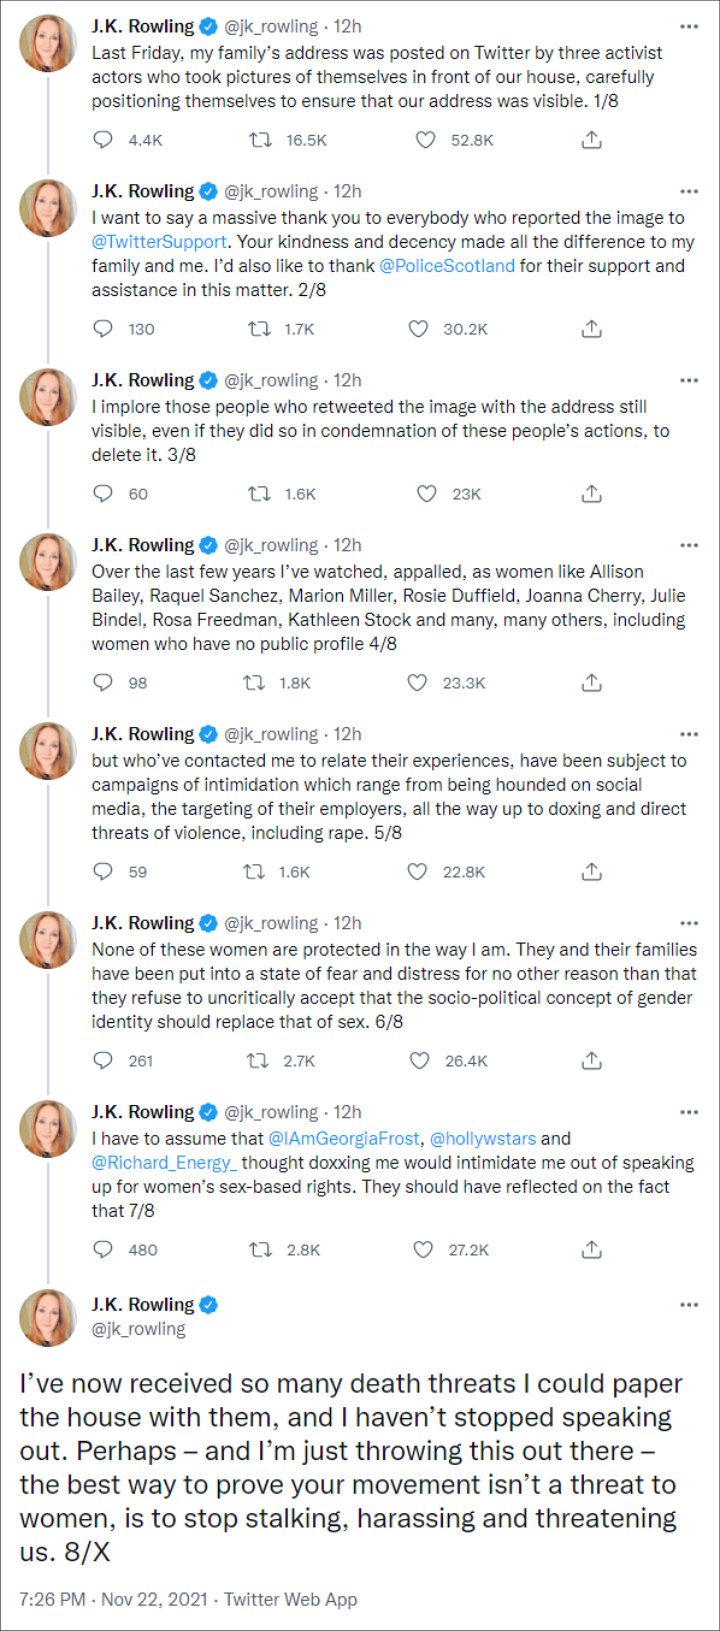 J.K. Rowling blasted activist for allegedly revealing her address